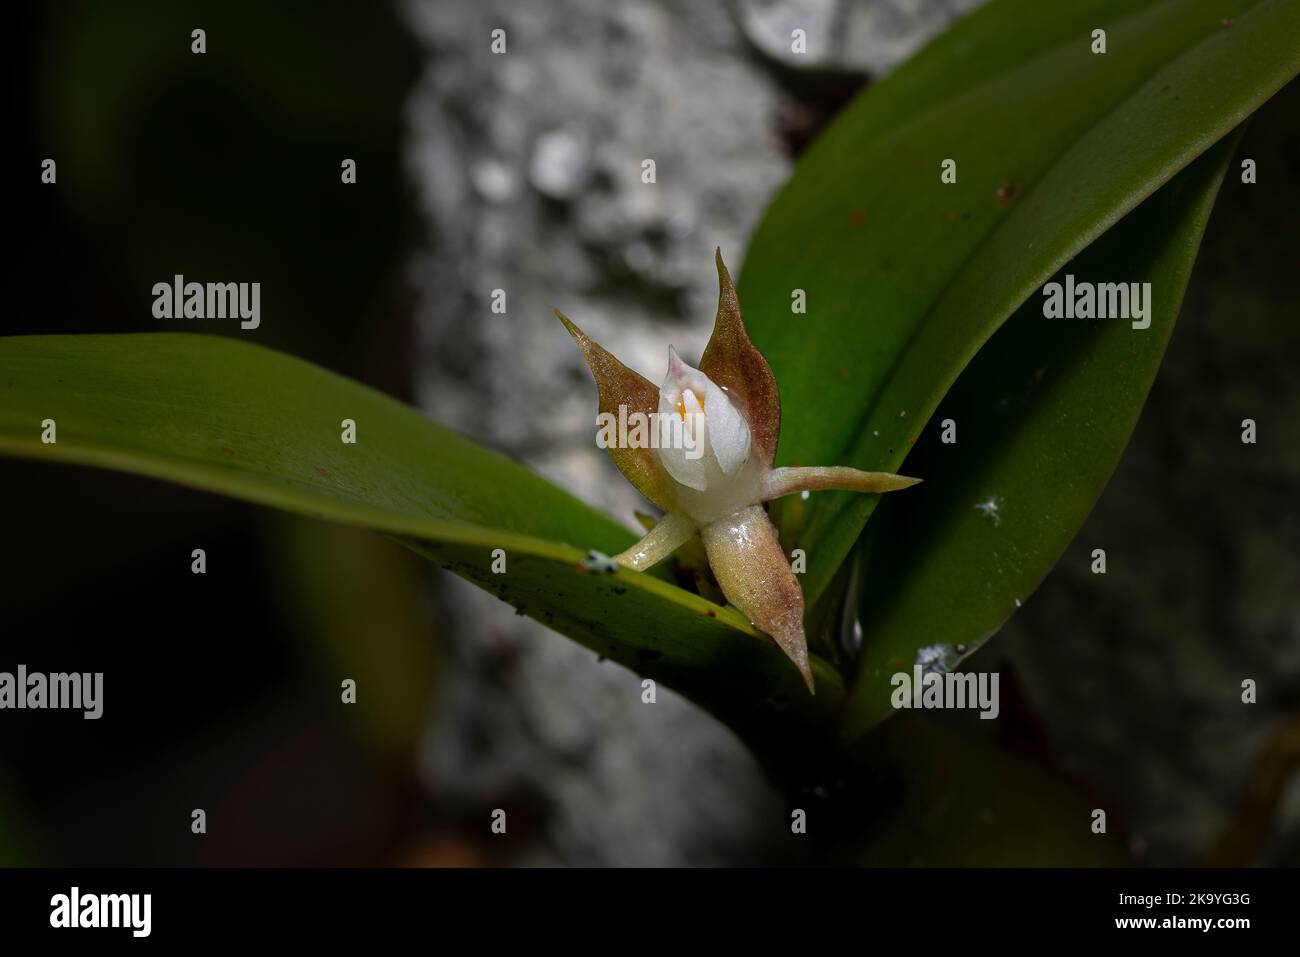 Tiny orchid flower growing in the middle of the leaf Stock Photo